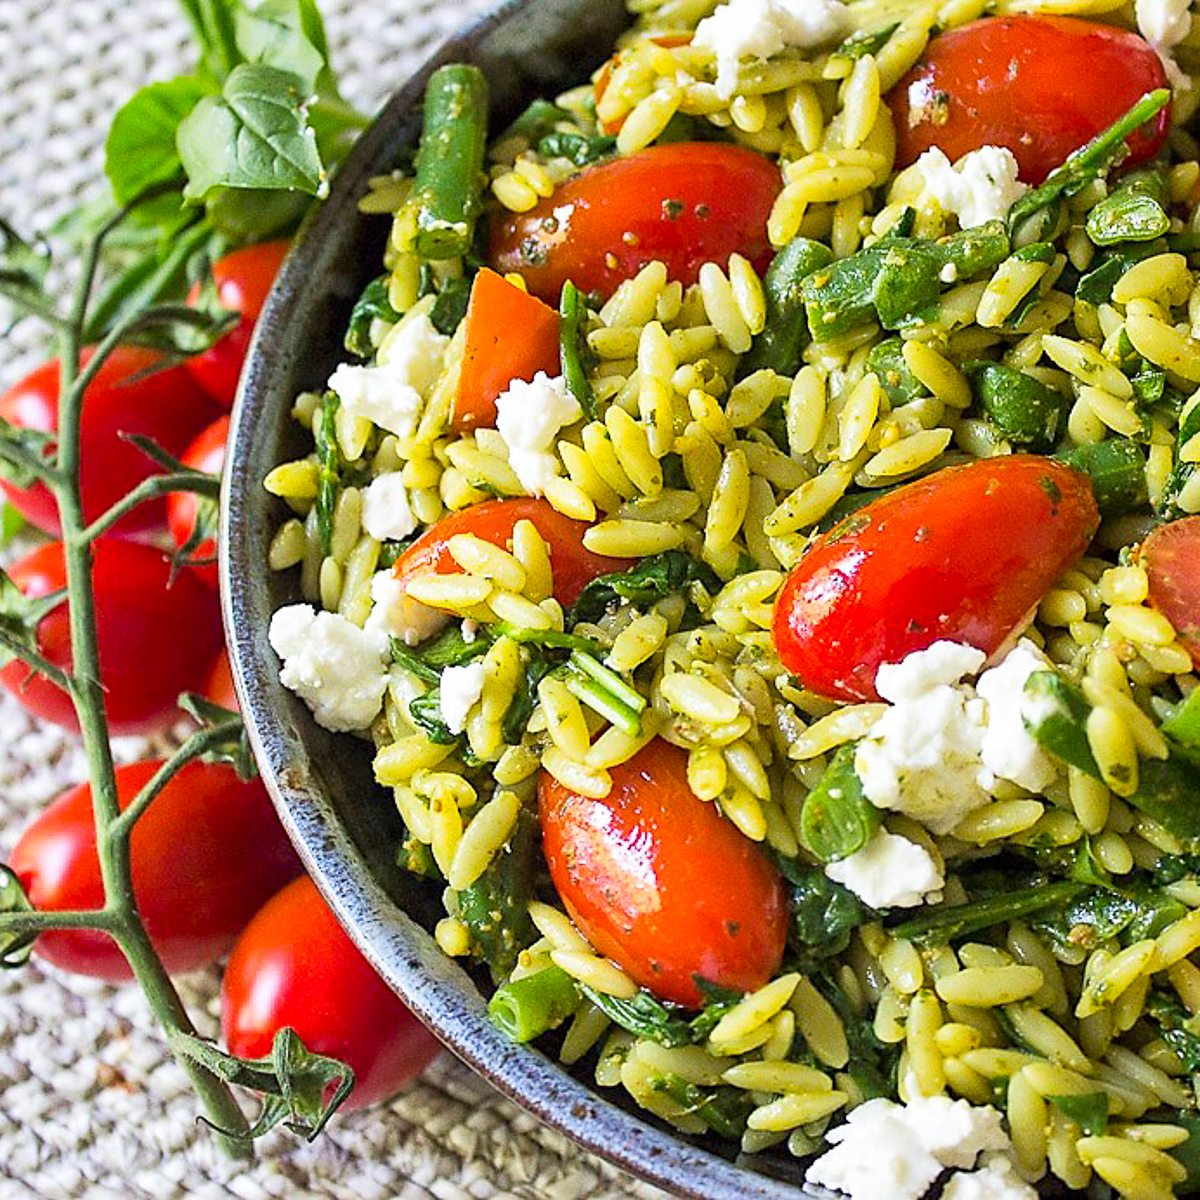 Pesto Orzo With Vegetables (20 Minutes)